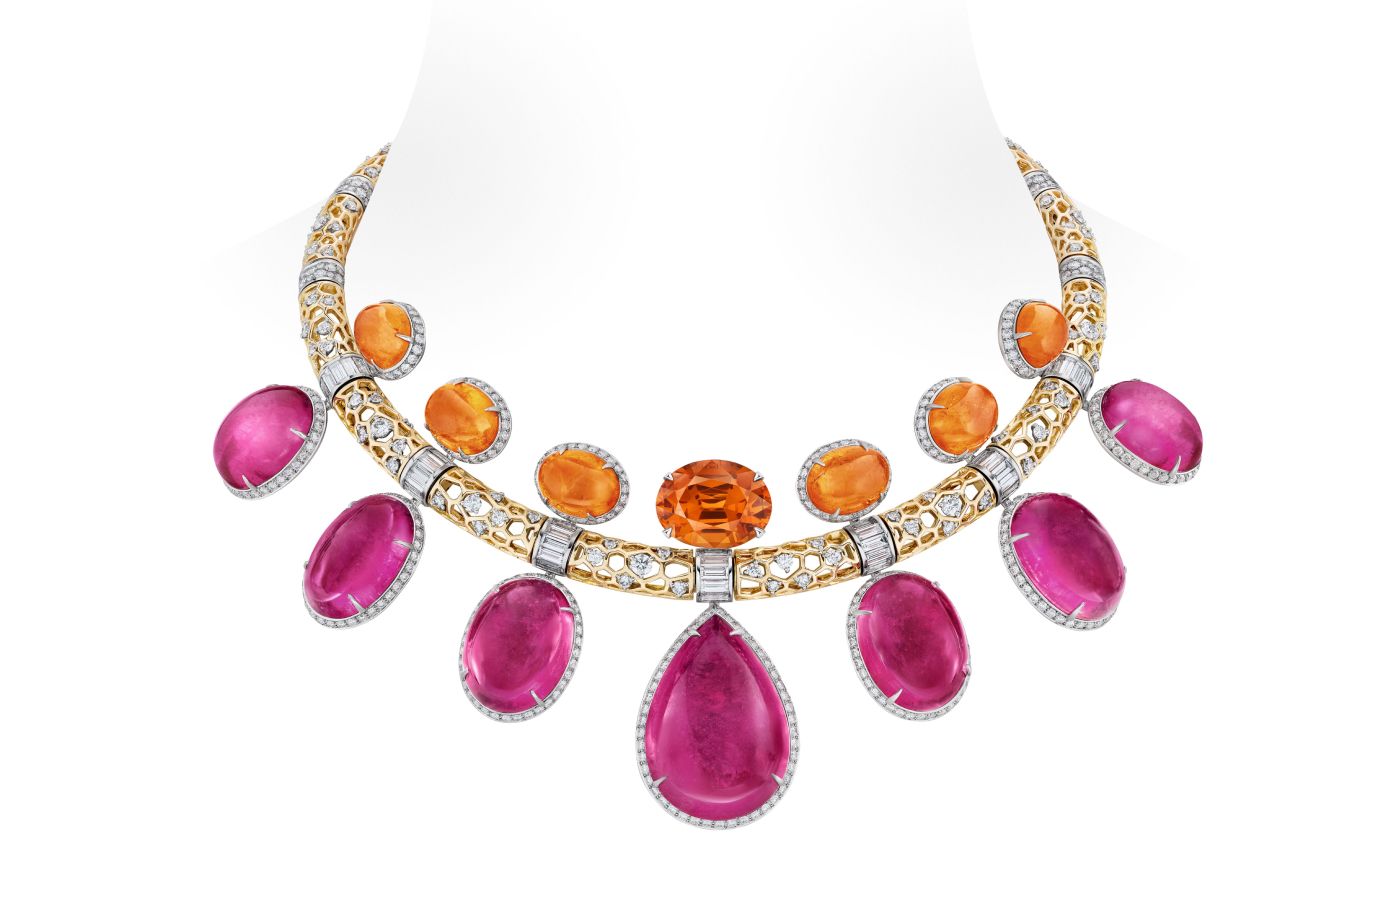 Louis Vuitton Seeds High Jewellery necklace in gold, platinum, a 52.75-ct pear-cut pink cabochon tourmaline rubelite, a 20.27-ct oval-cut spessartite Mandarin garnet, rubelites, Mandarin garnets and diamonds from the Deep Time High Jewellery Collection